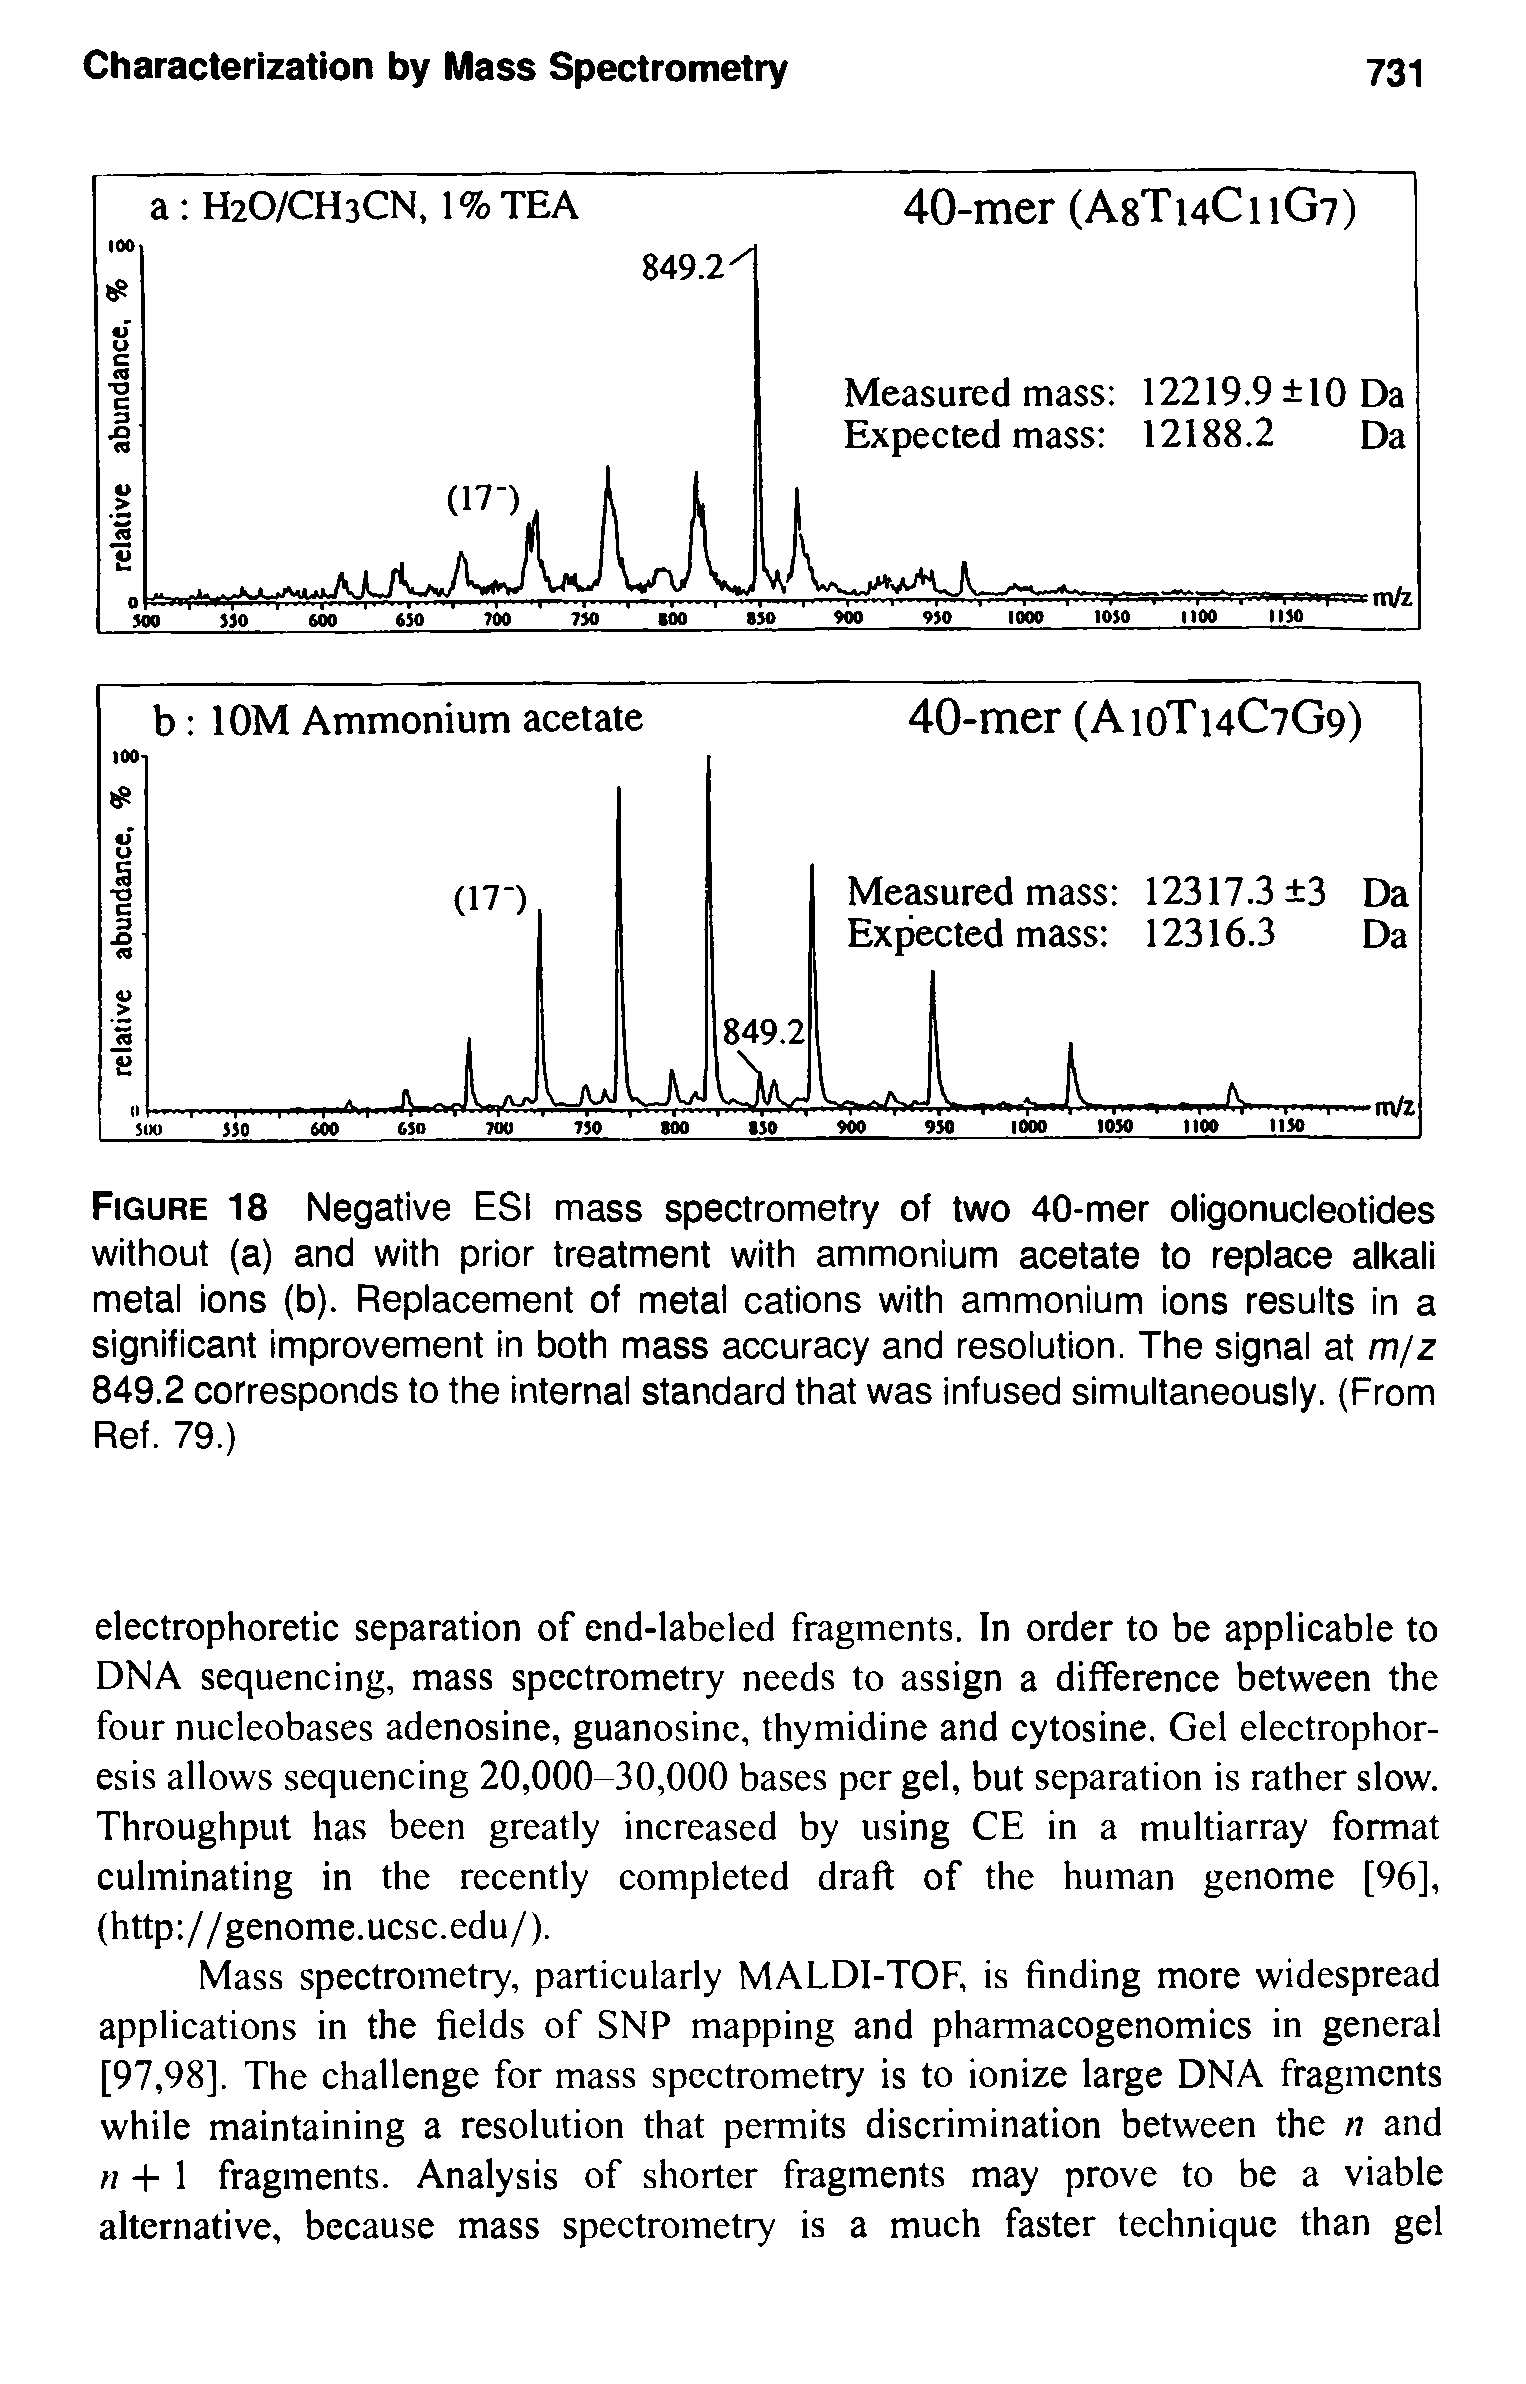 Figure 18 Negative ESI mass spectrometry of two 40-mer oligonucleotides without (a) and with prior treatment with ammonium acetate to replace alkali metal ions (b). Replacement of metal cations with ammonium ions results in a significant improvement in both mass accuracy and resolution. The signal at m/z 849.2 corresponds to the internal standard that was infused simultaneously. (From Ref. 79.)...